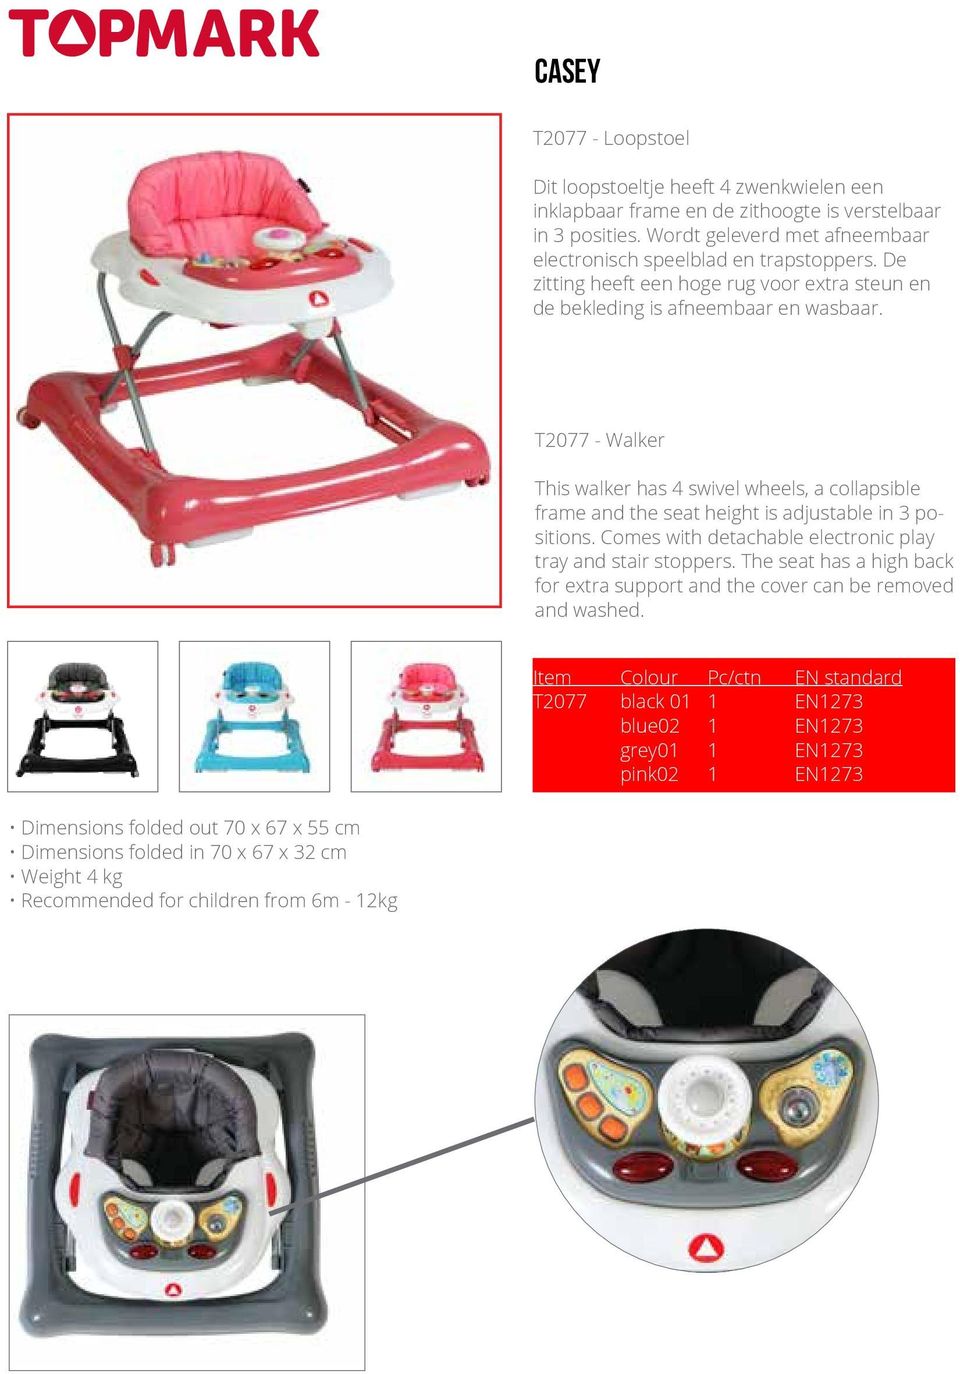 T2077 - Walker This walker has 4 swivel wheels, a collapsible frame and the seat height is adjustable in 3 positions. Comes with detachable electronic play tray and stair stoppers.